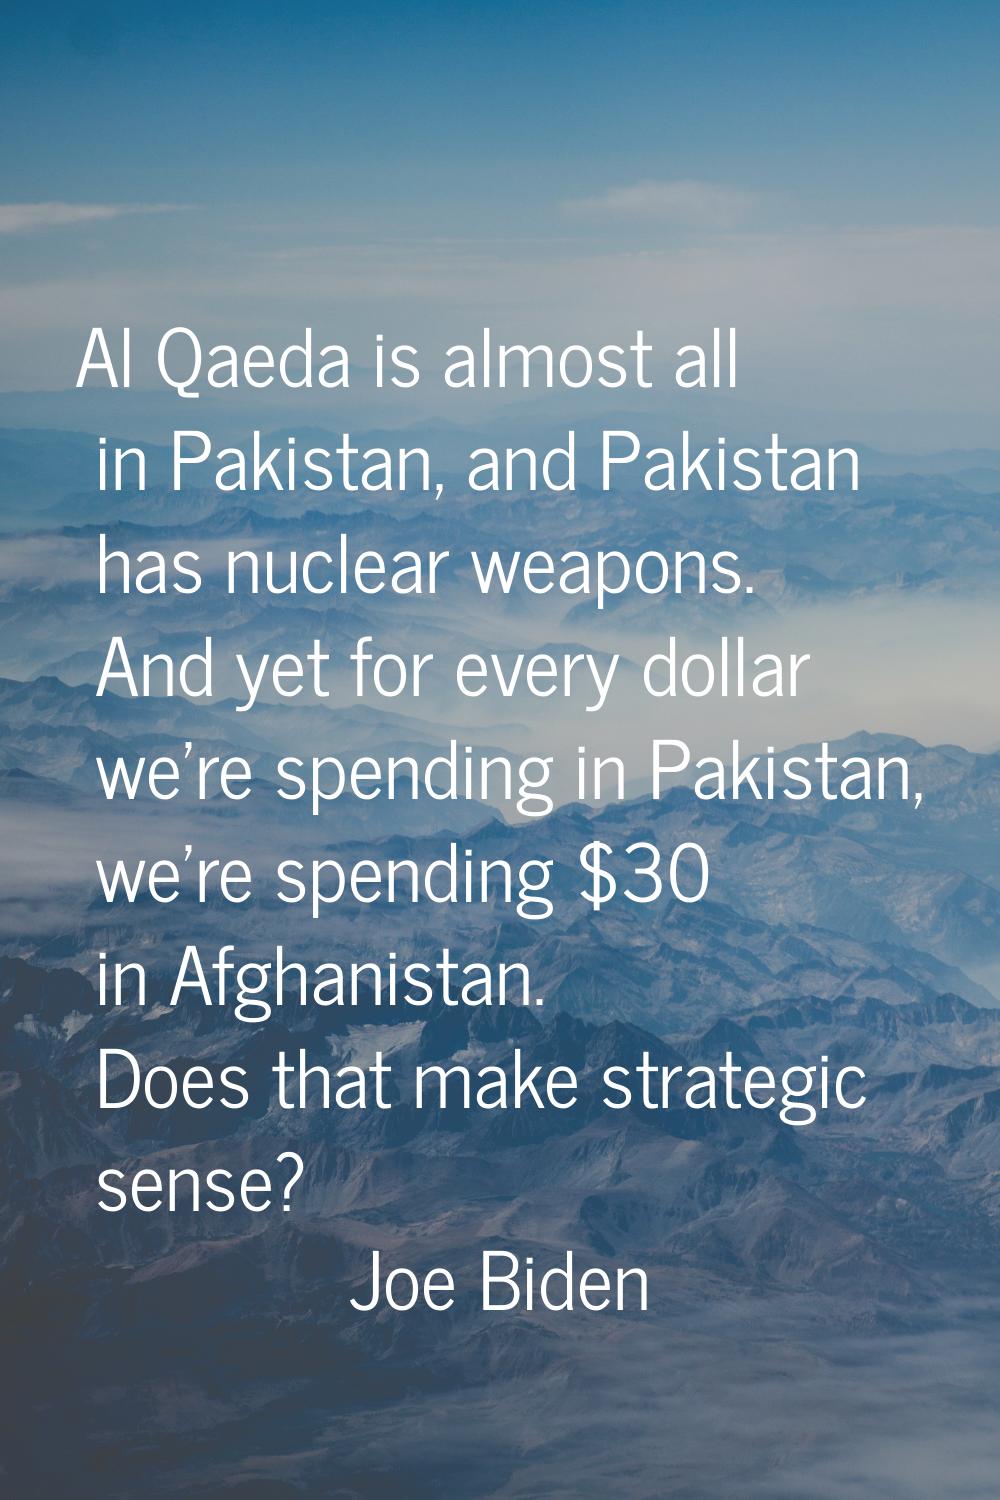 Al Qaeda is almost all in Pakistan, and Pakistan has nuclear weapons. And yet for every dollar we'r